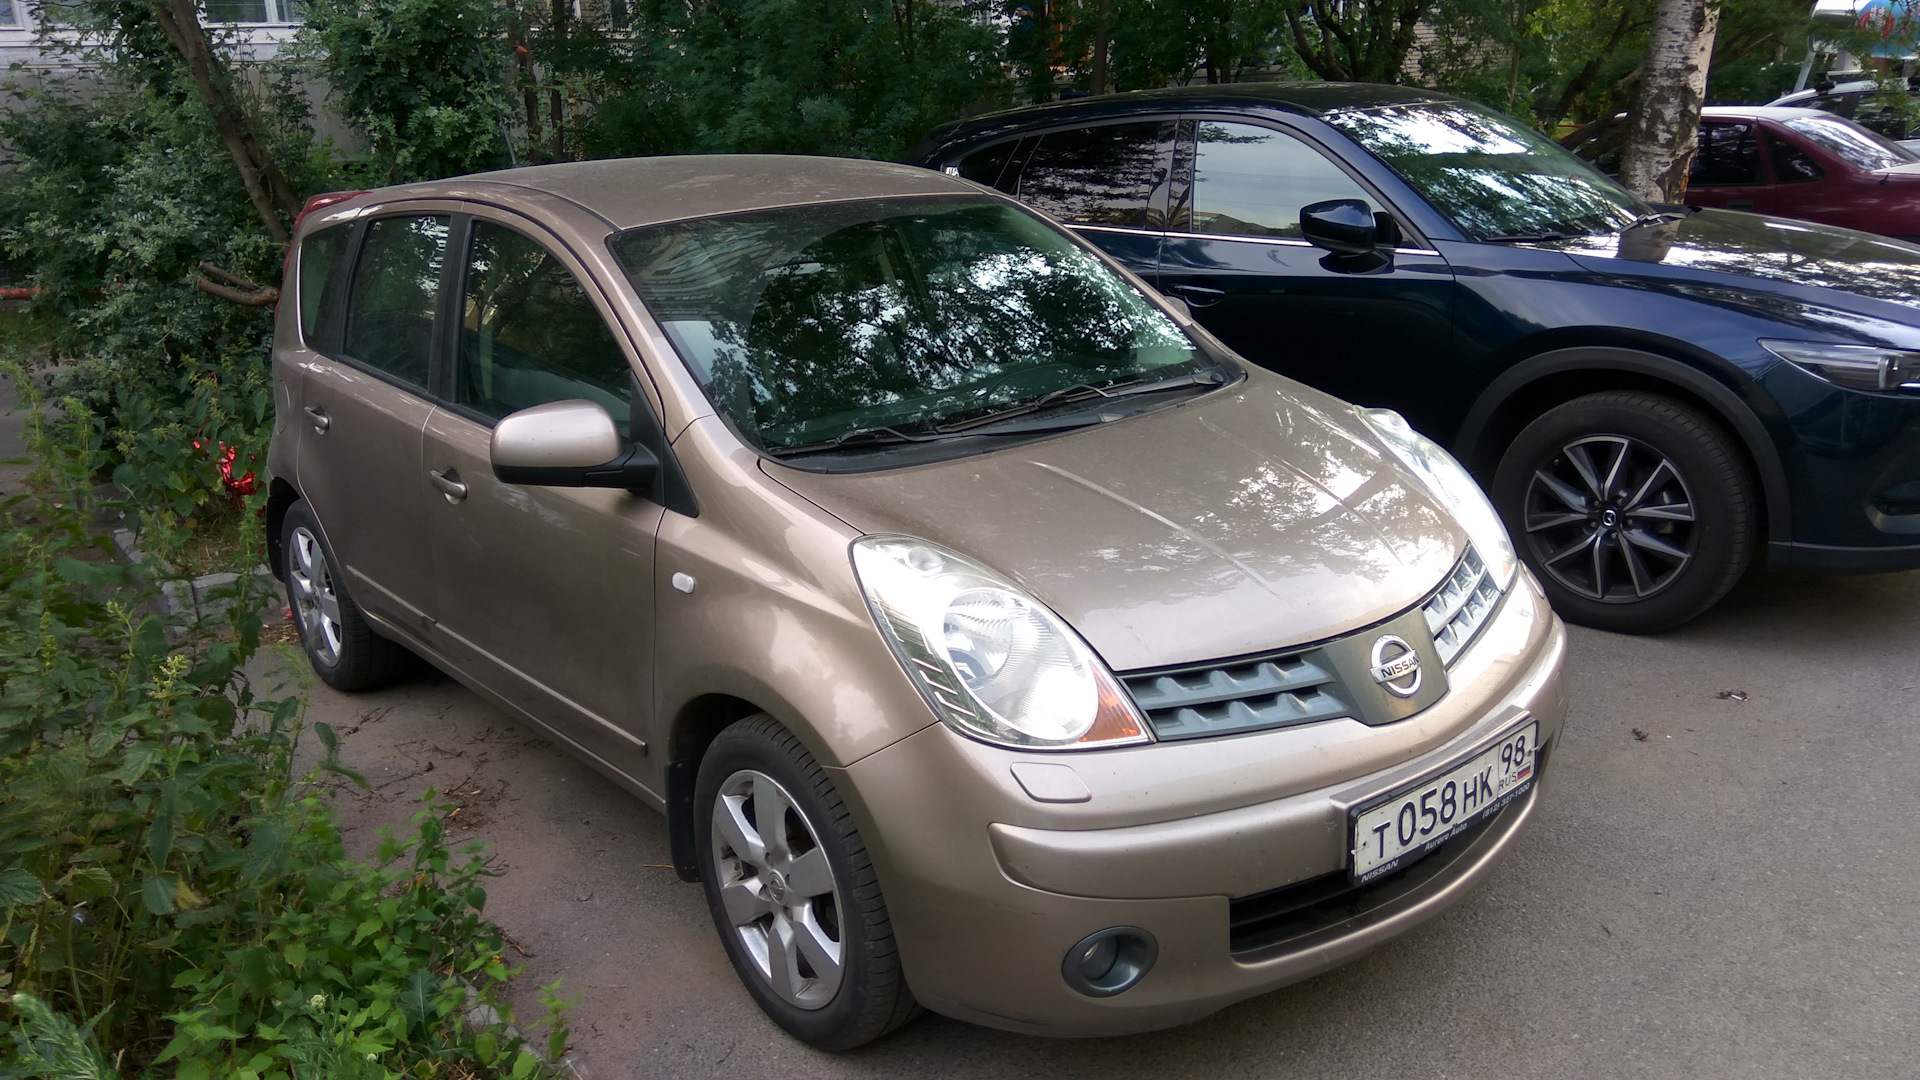 Nissan note автомат. Nissan Note 2007 1.6. Nissan Note 1. Nissan Note 2011 1.6. Nissan Note 2008 1.6 автомат.